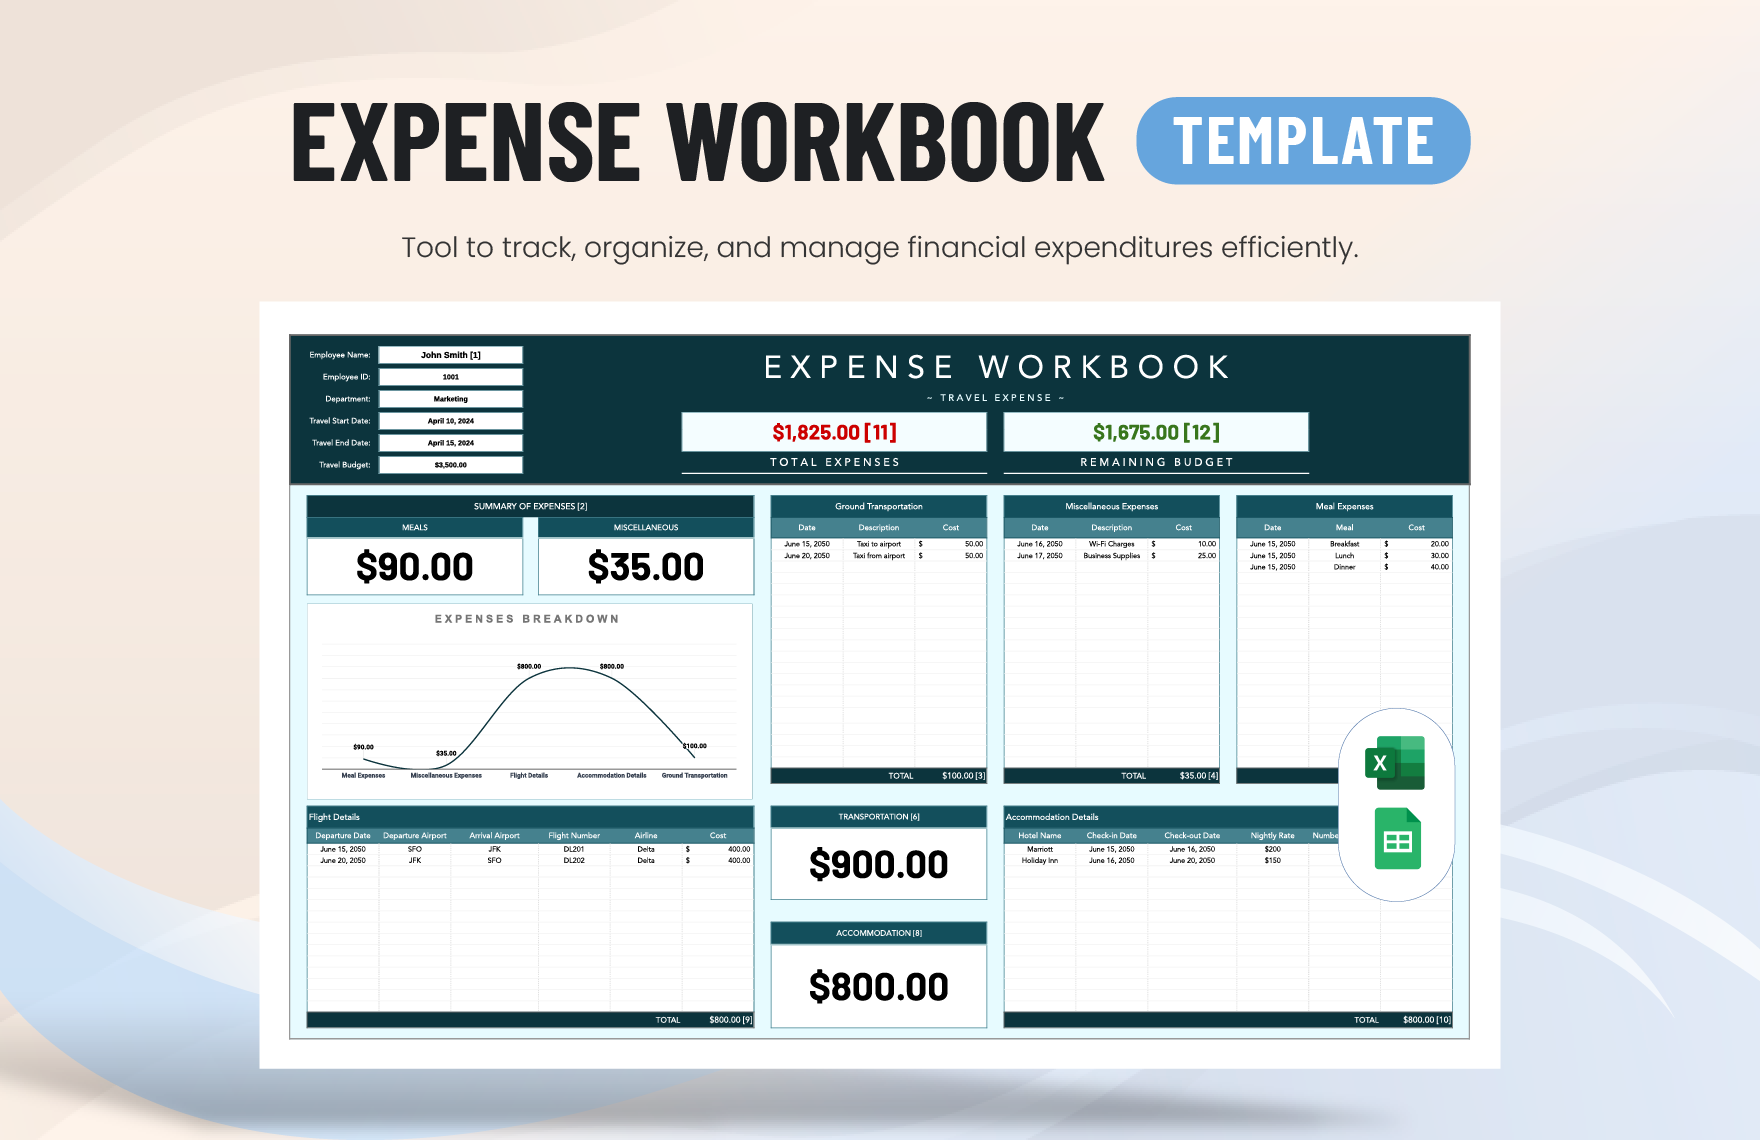 Expense Workbook Template in Excel, Google Sheets